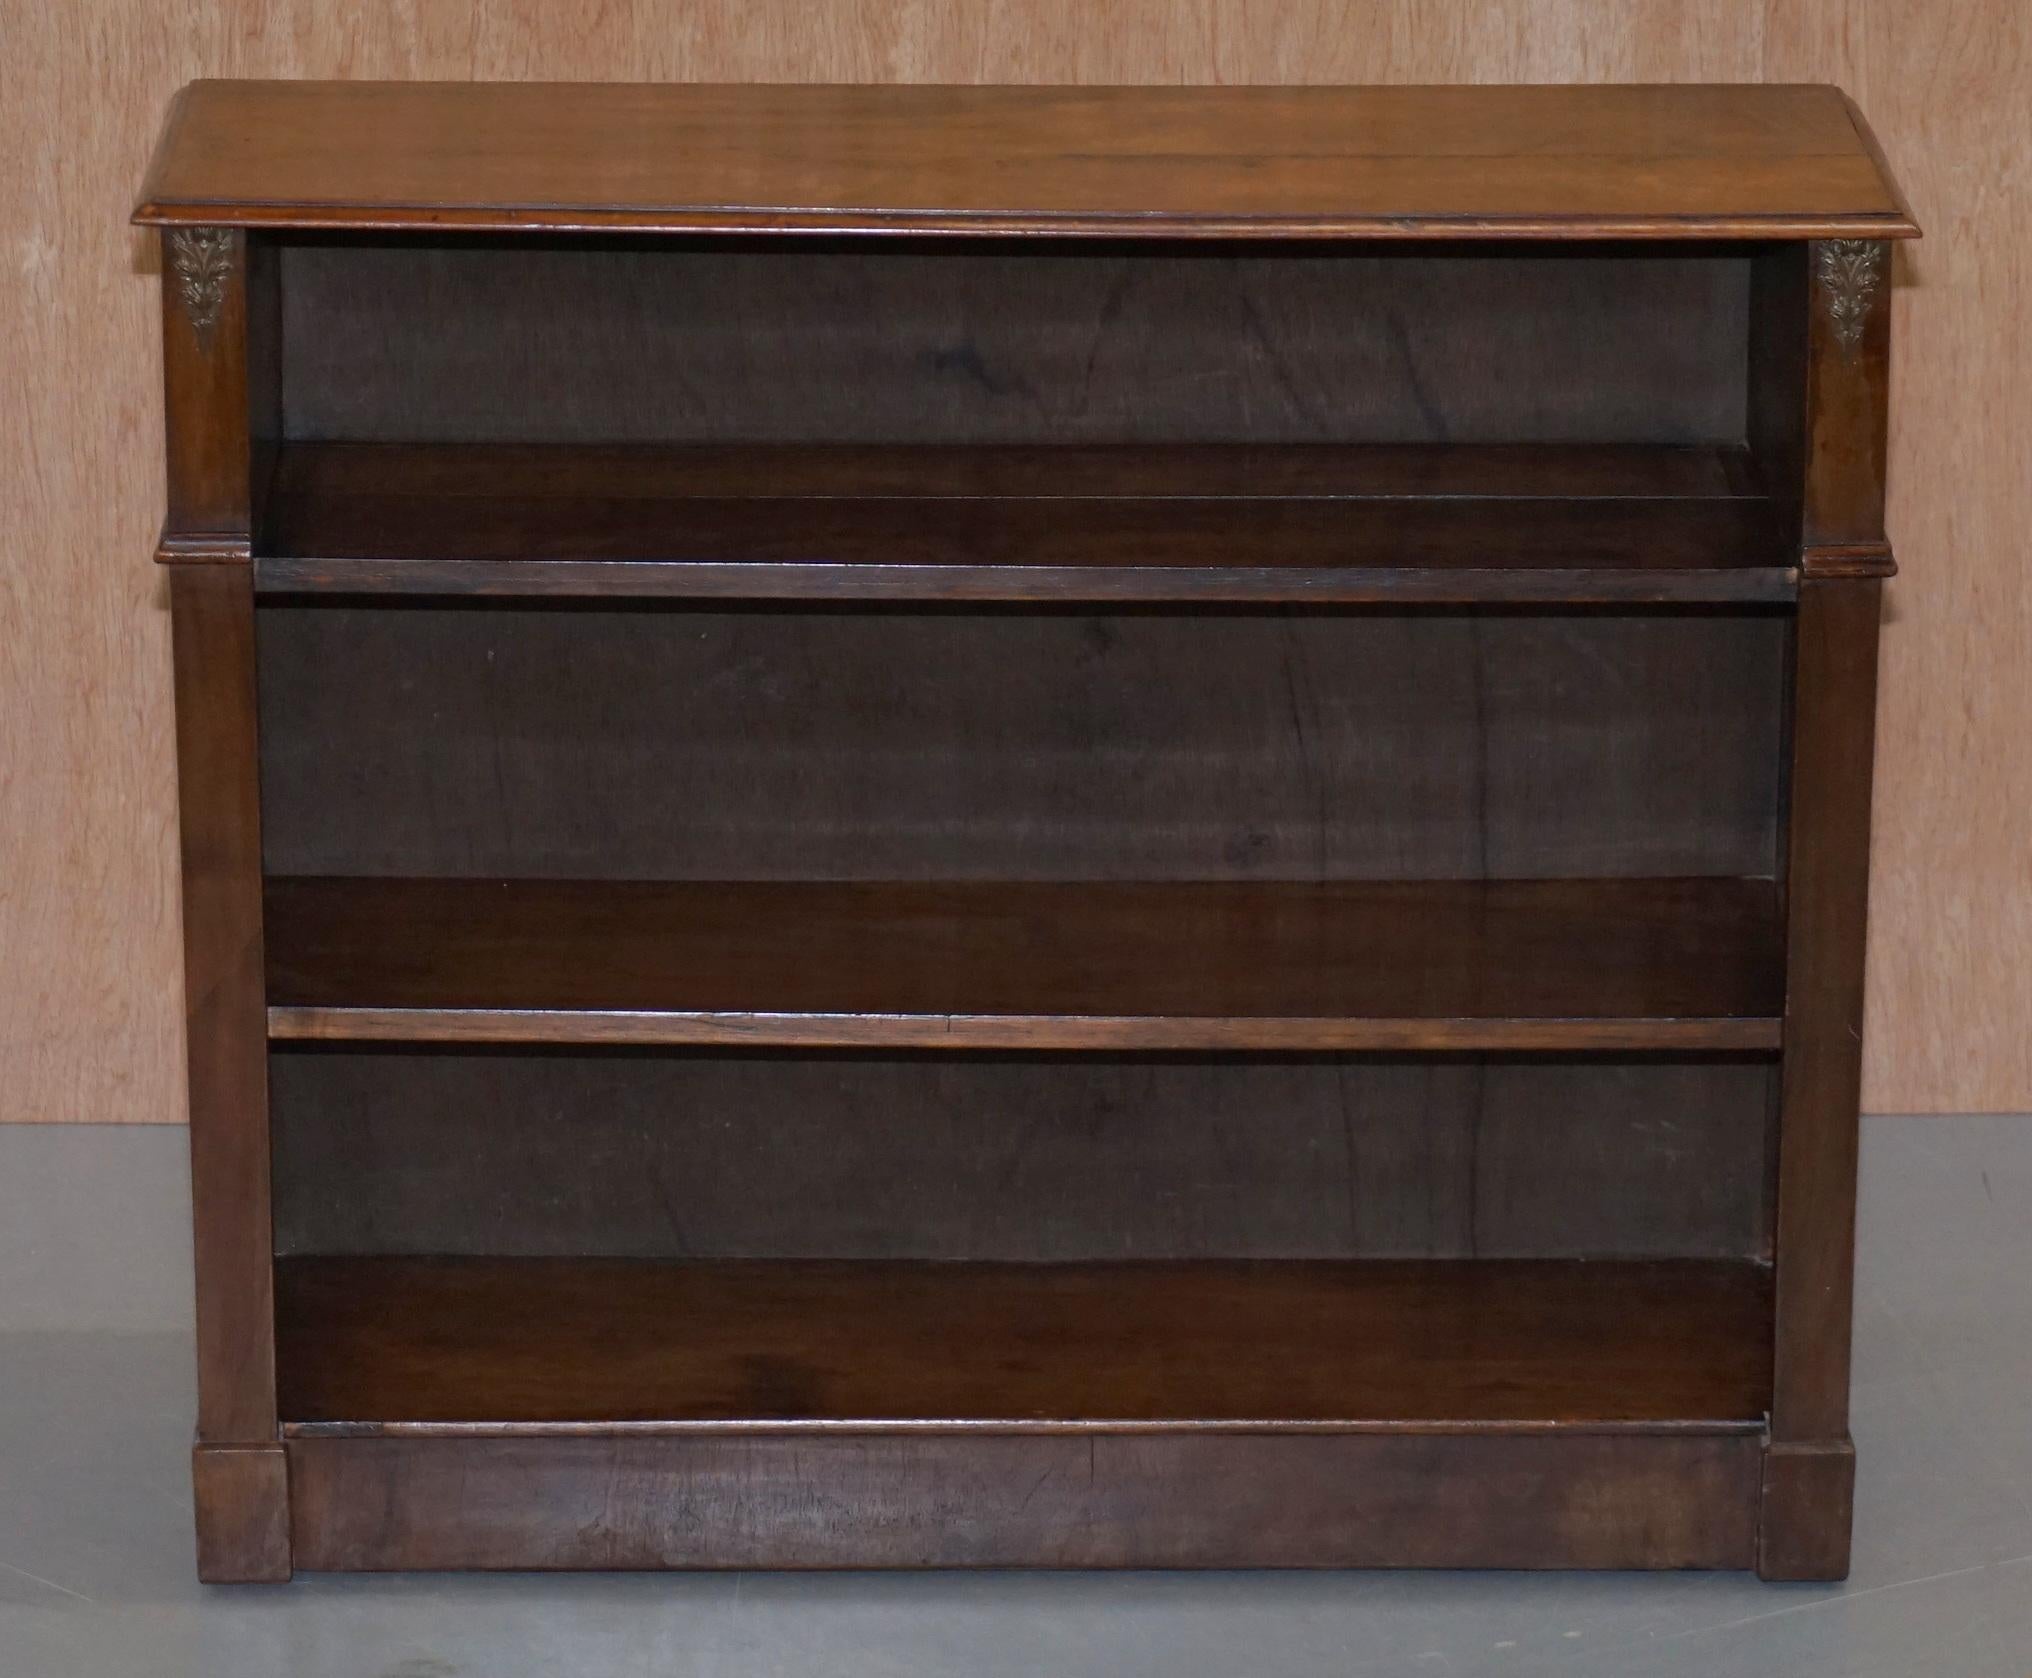 We are delighted to offer for sale this lovely Victorian Dwarf open Library bookcase in Walnut

A good looking well made and decorative piece. Dwarf bookcases are very versatile pieces as they can be used in almost any room and still look